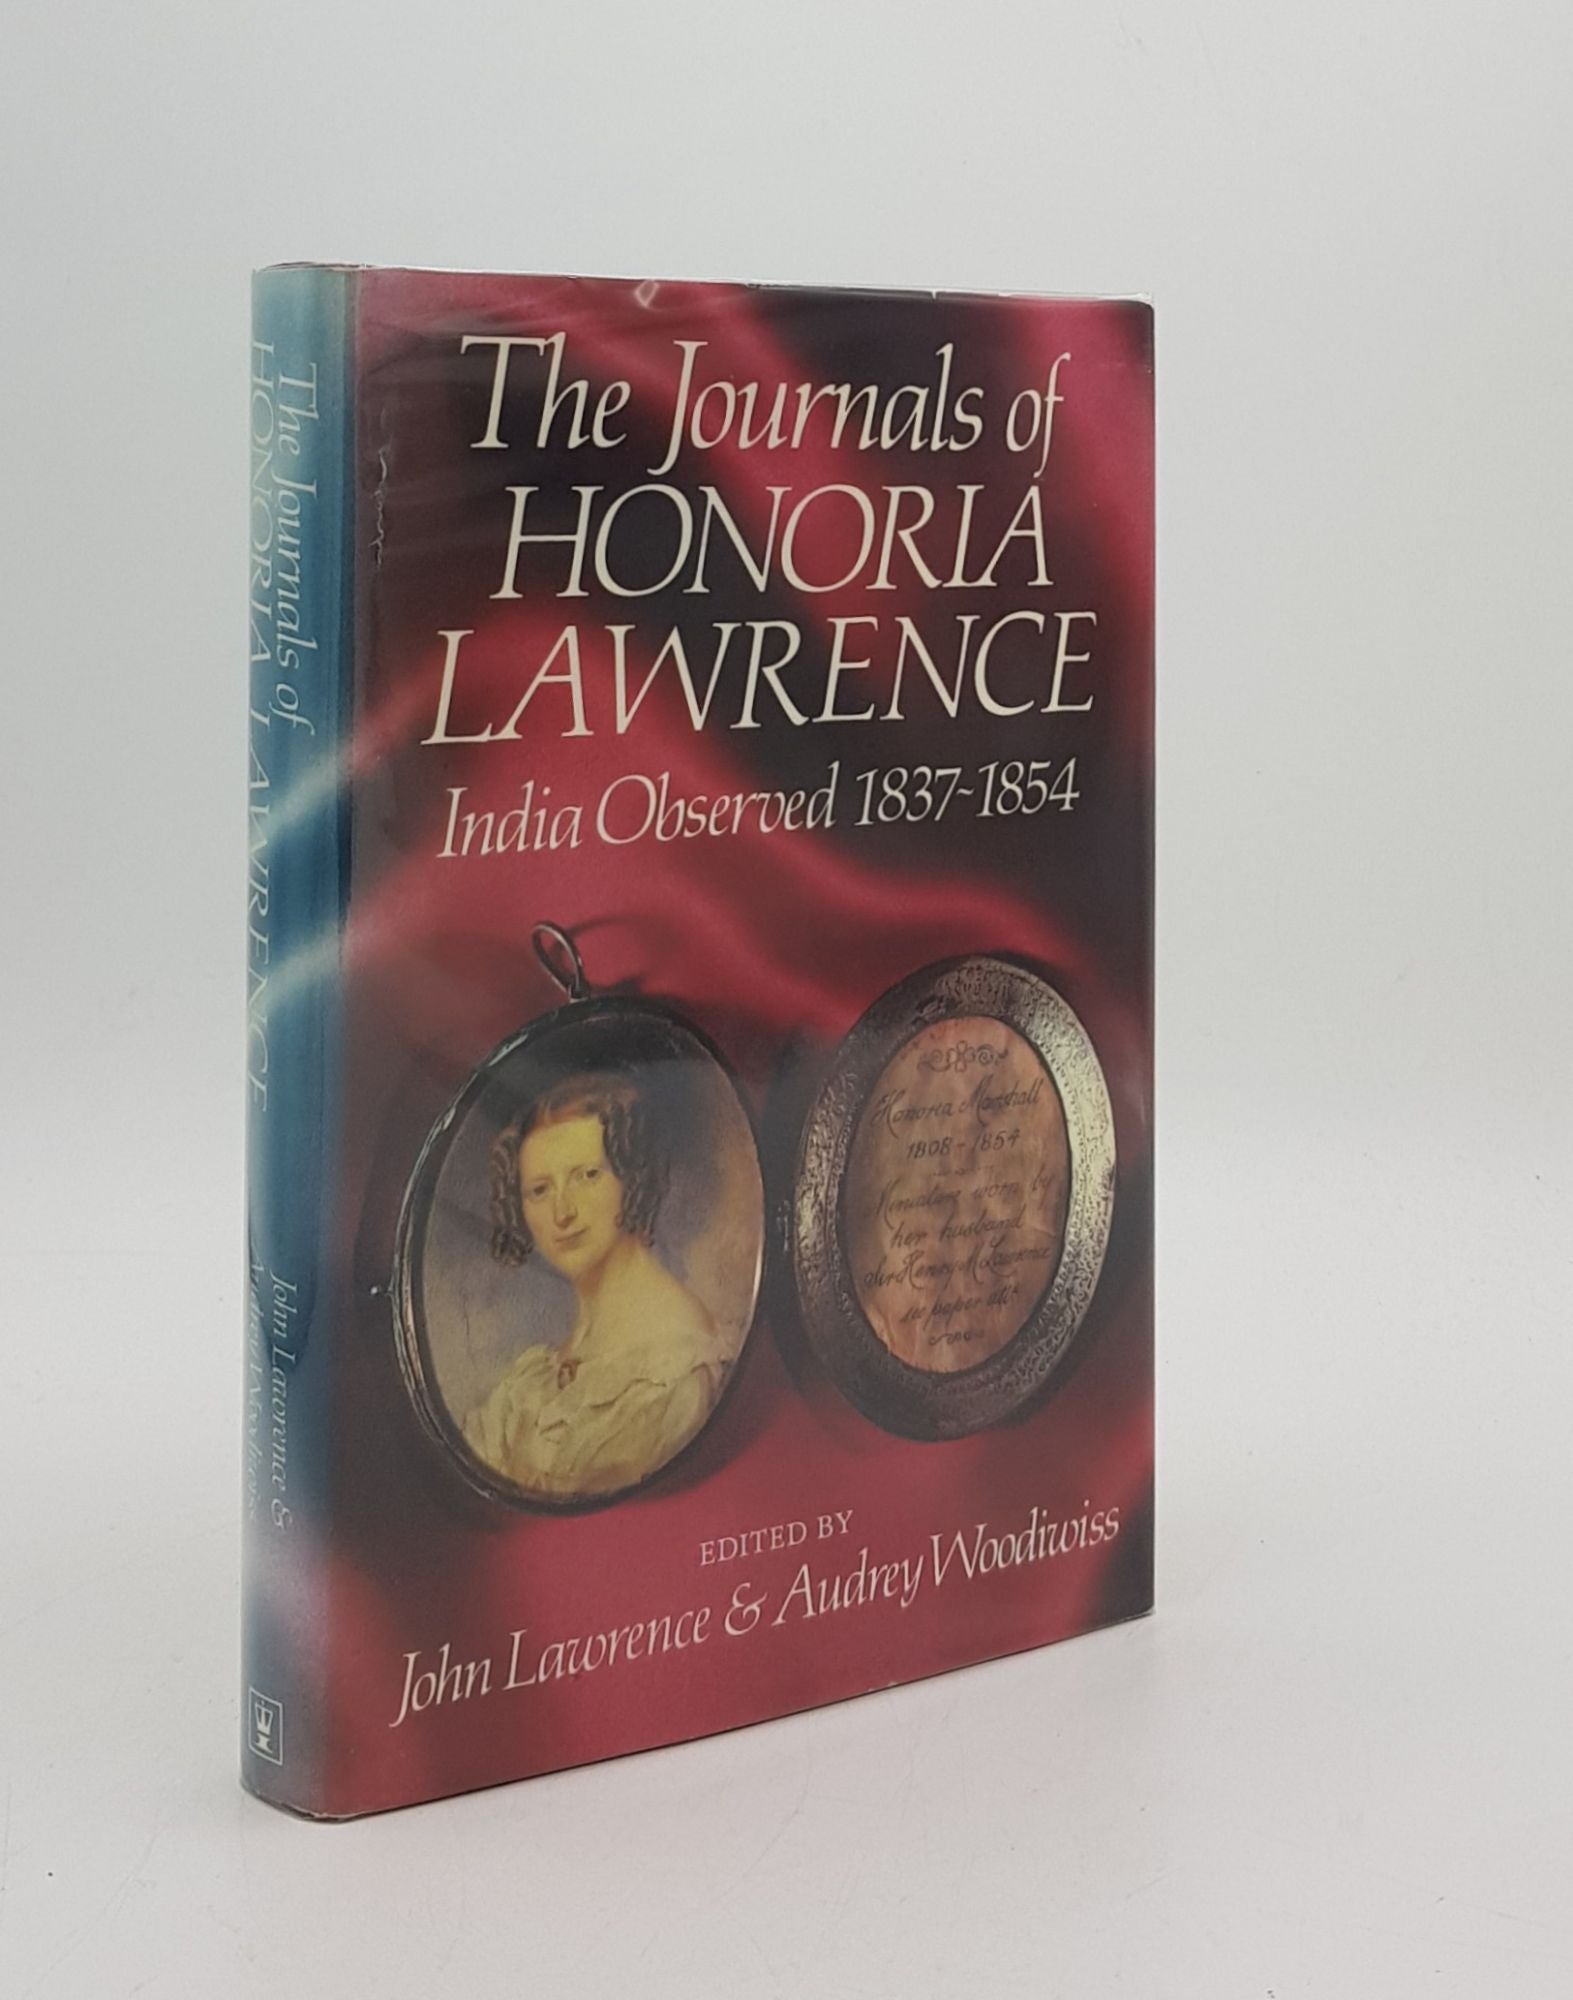 LAWRENCE Honoria, LAWRENCE John, WOODIWISS Audrey - The Journals of Honoria Lawrence India Observed 1837-1854